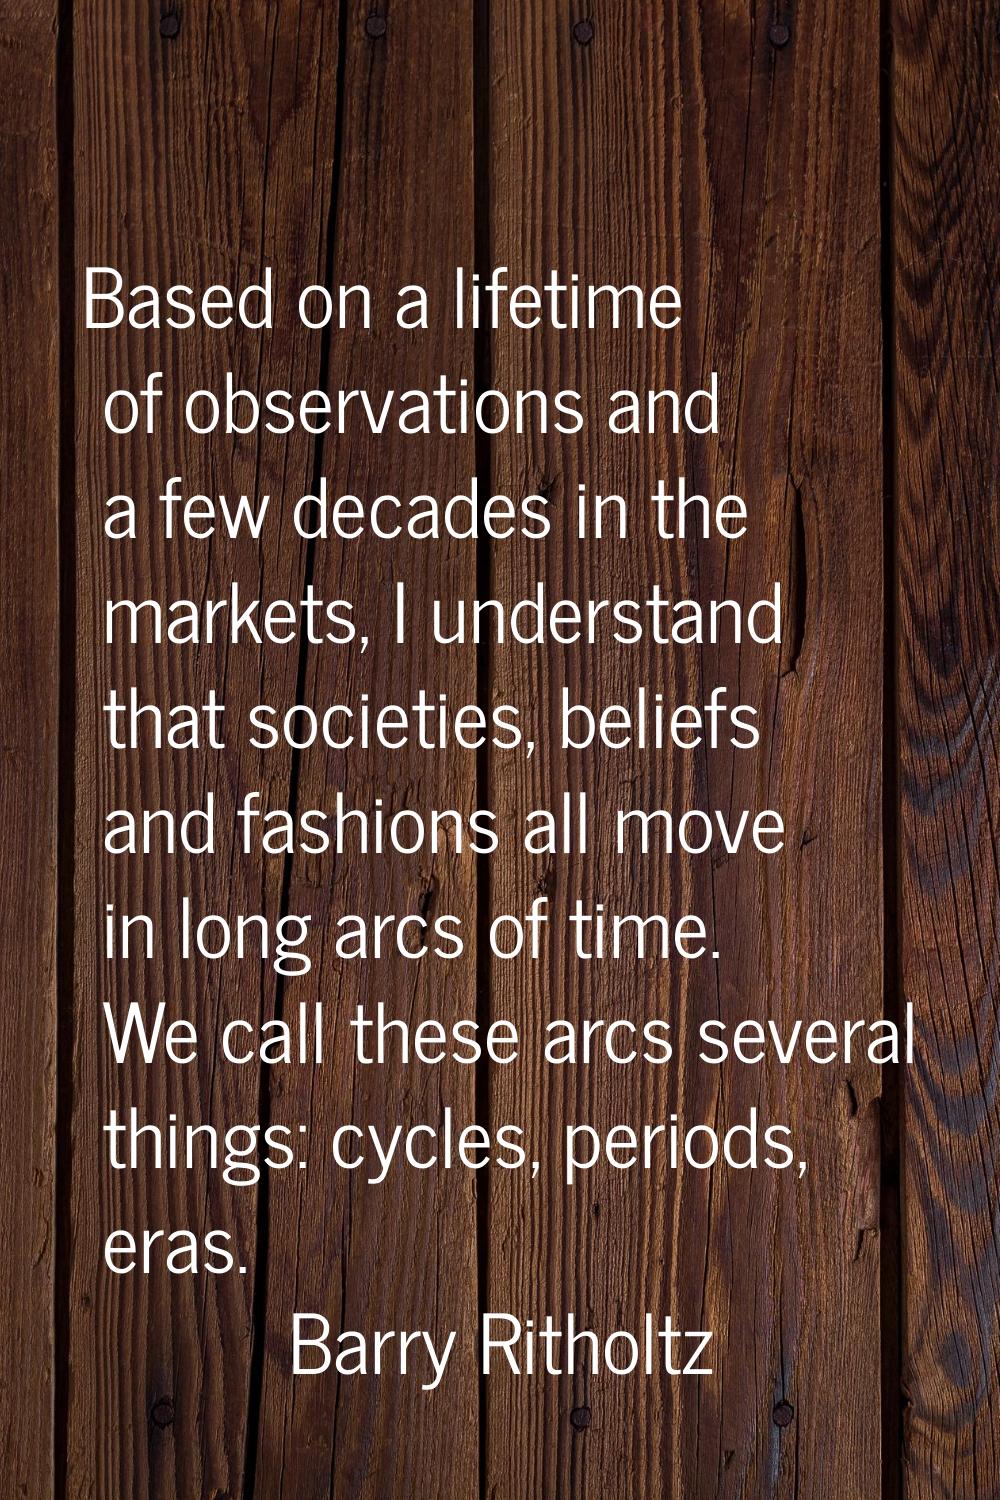 Based on a lifetime of observations and a few decades in the markets, I understand that societies, 